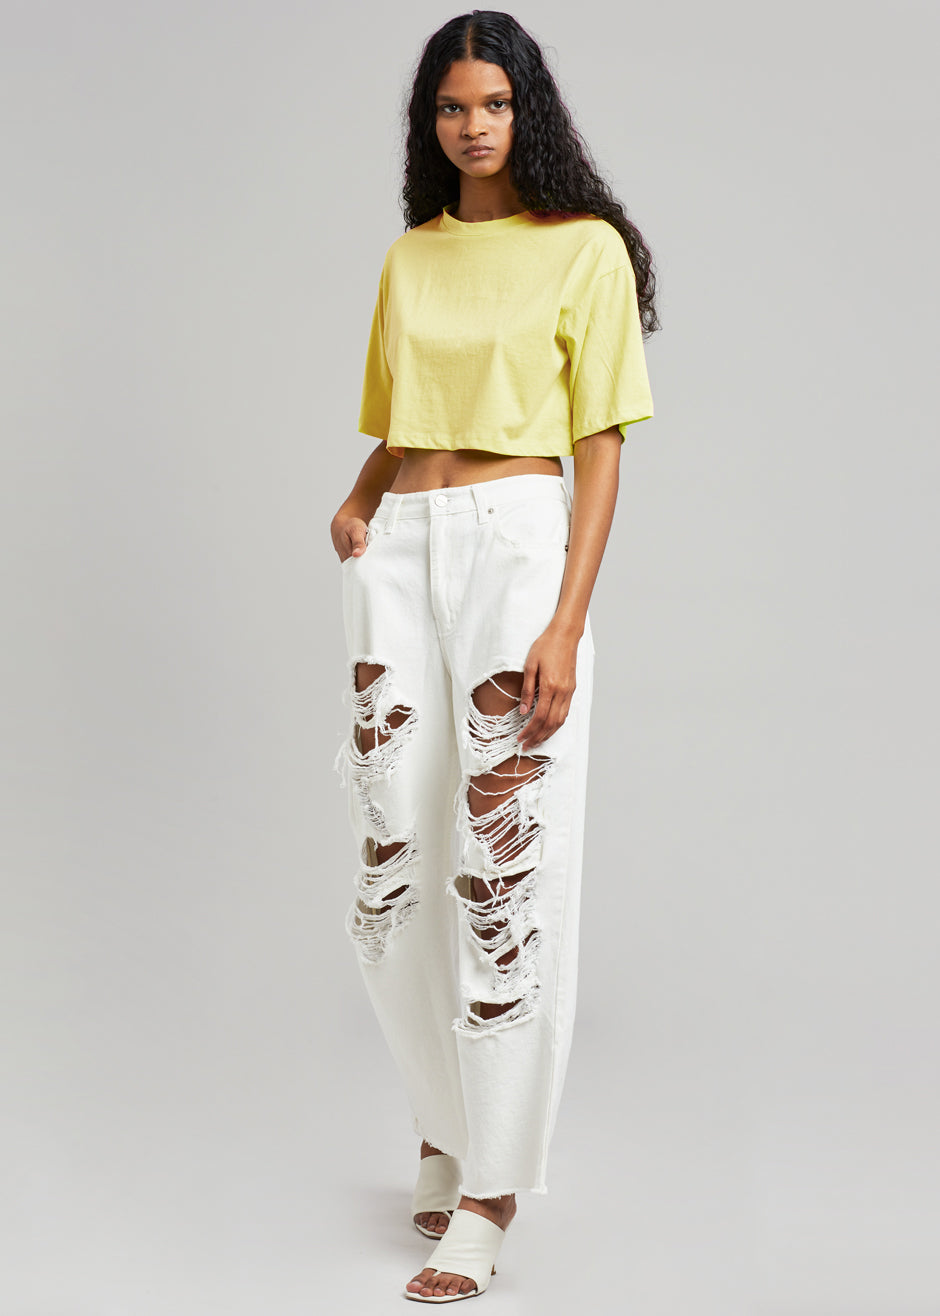 Tory Ripped Jeans - White - 5